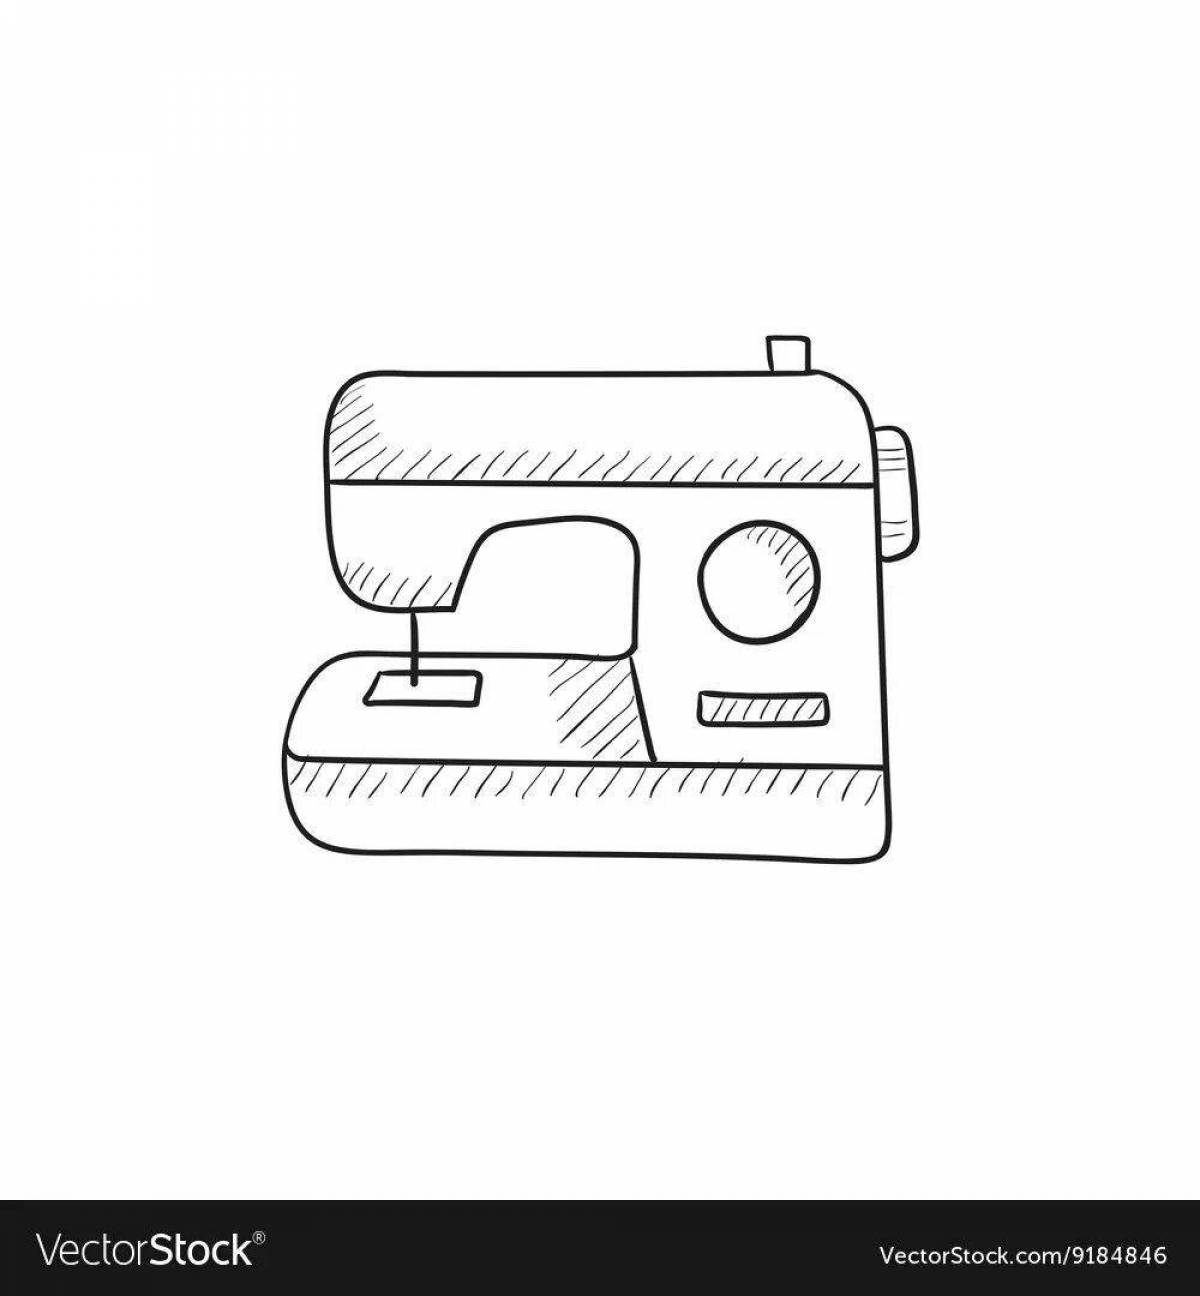 Cute sewing machine coloring page